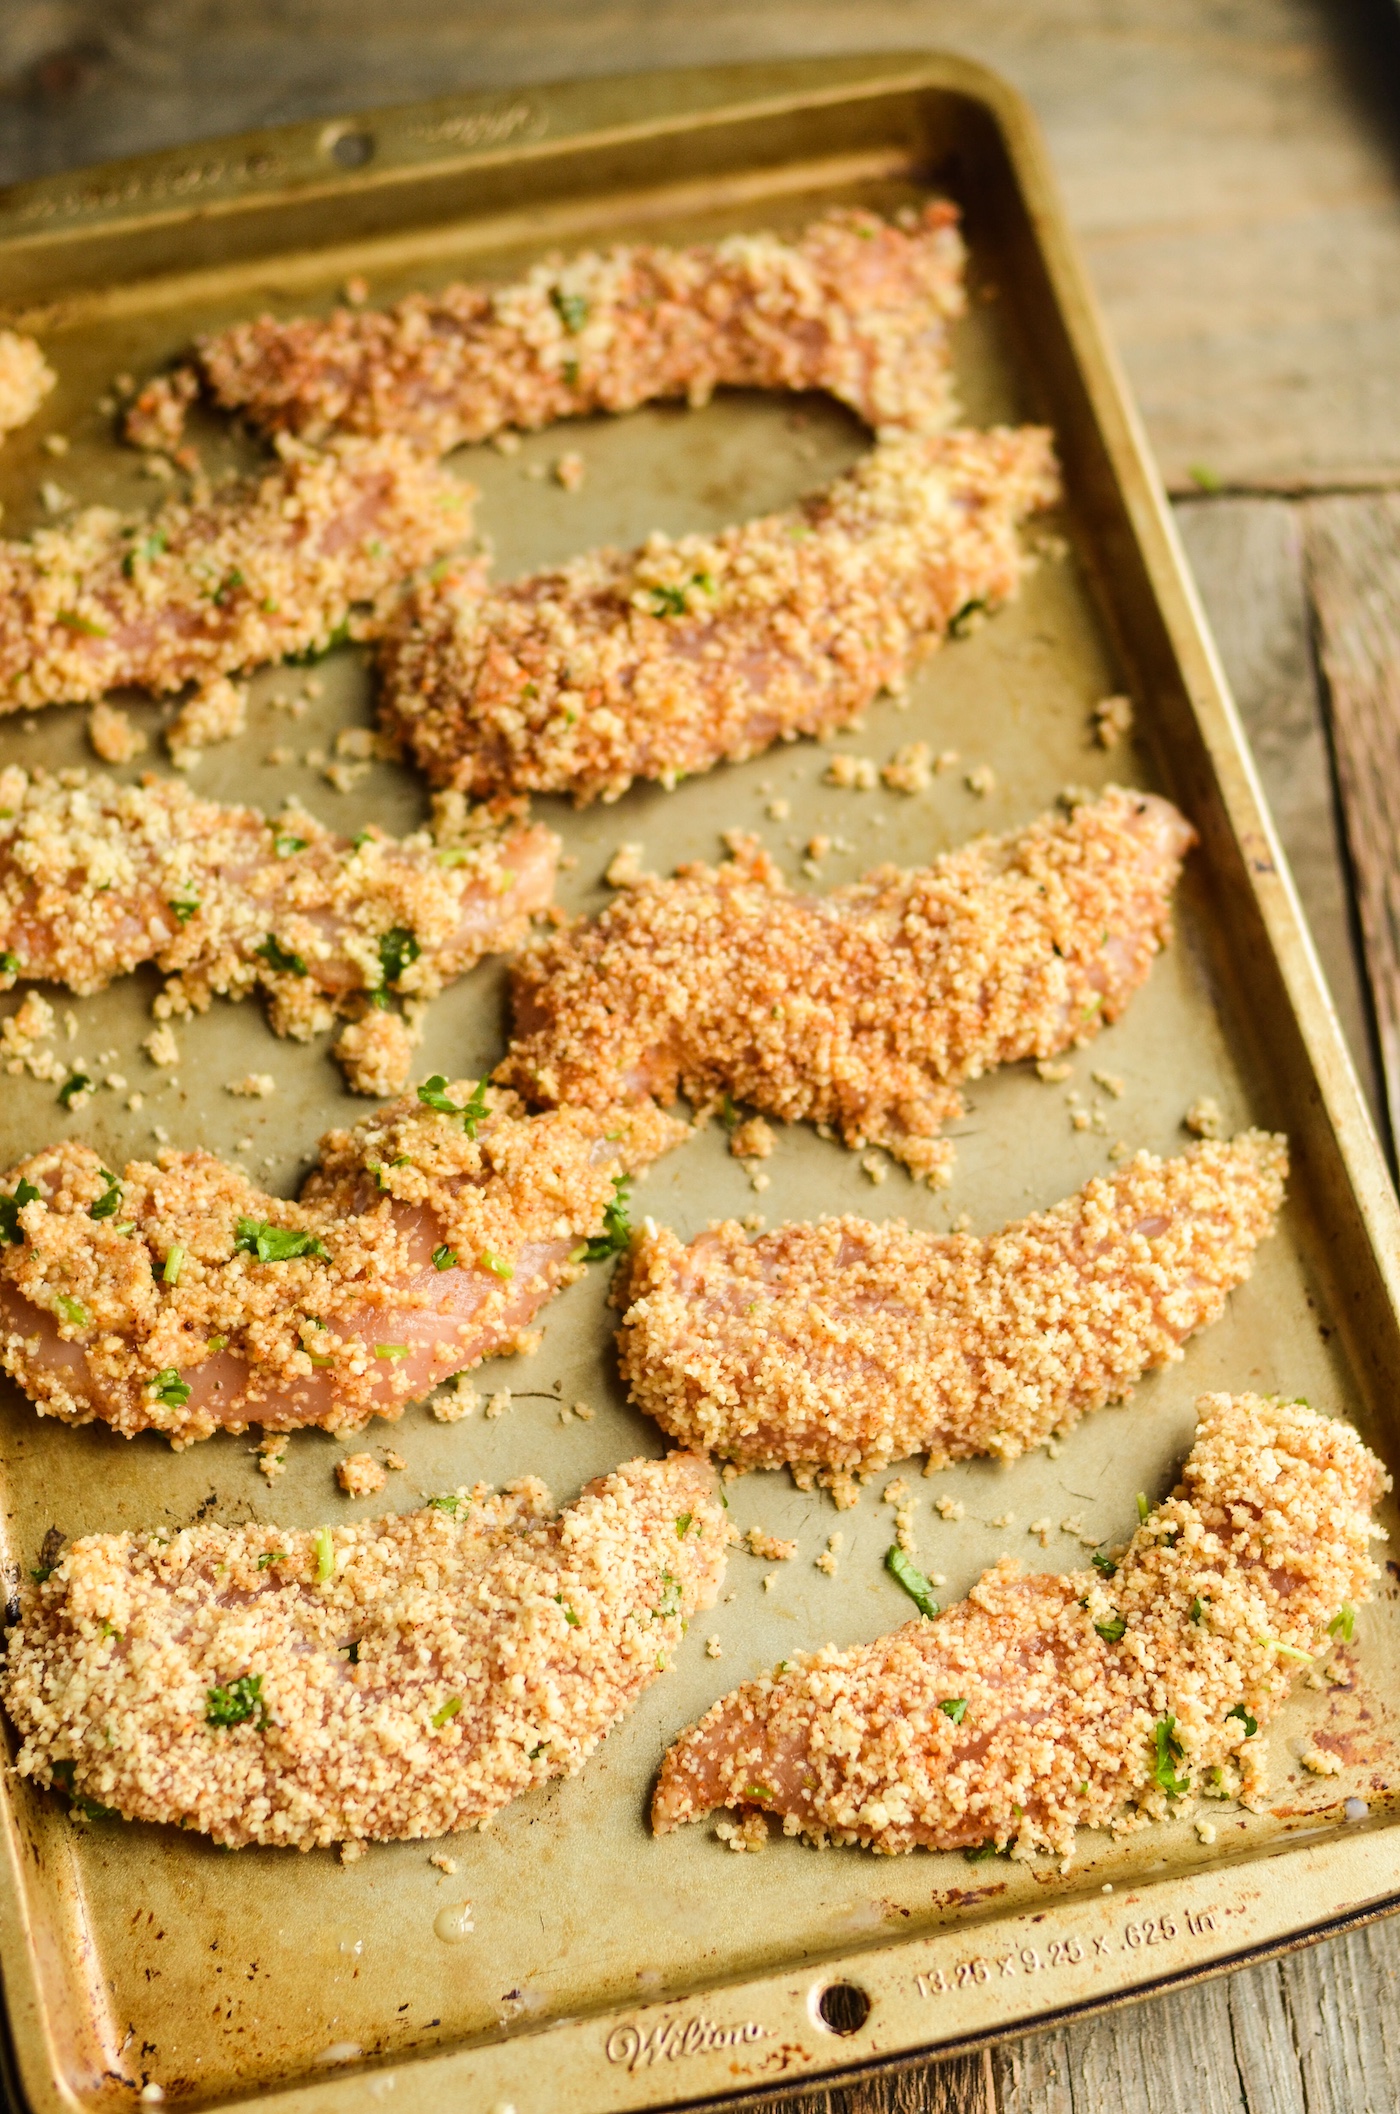 Chicken tenders coated in almond flour on a baking sheet